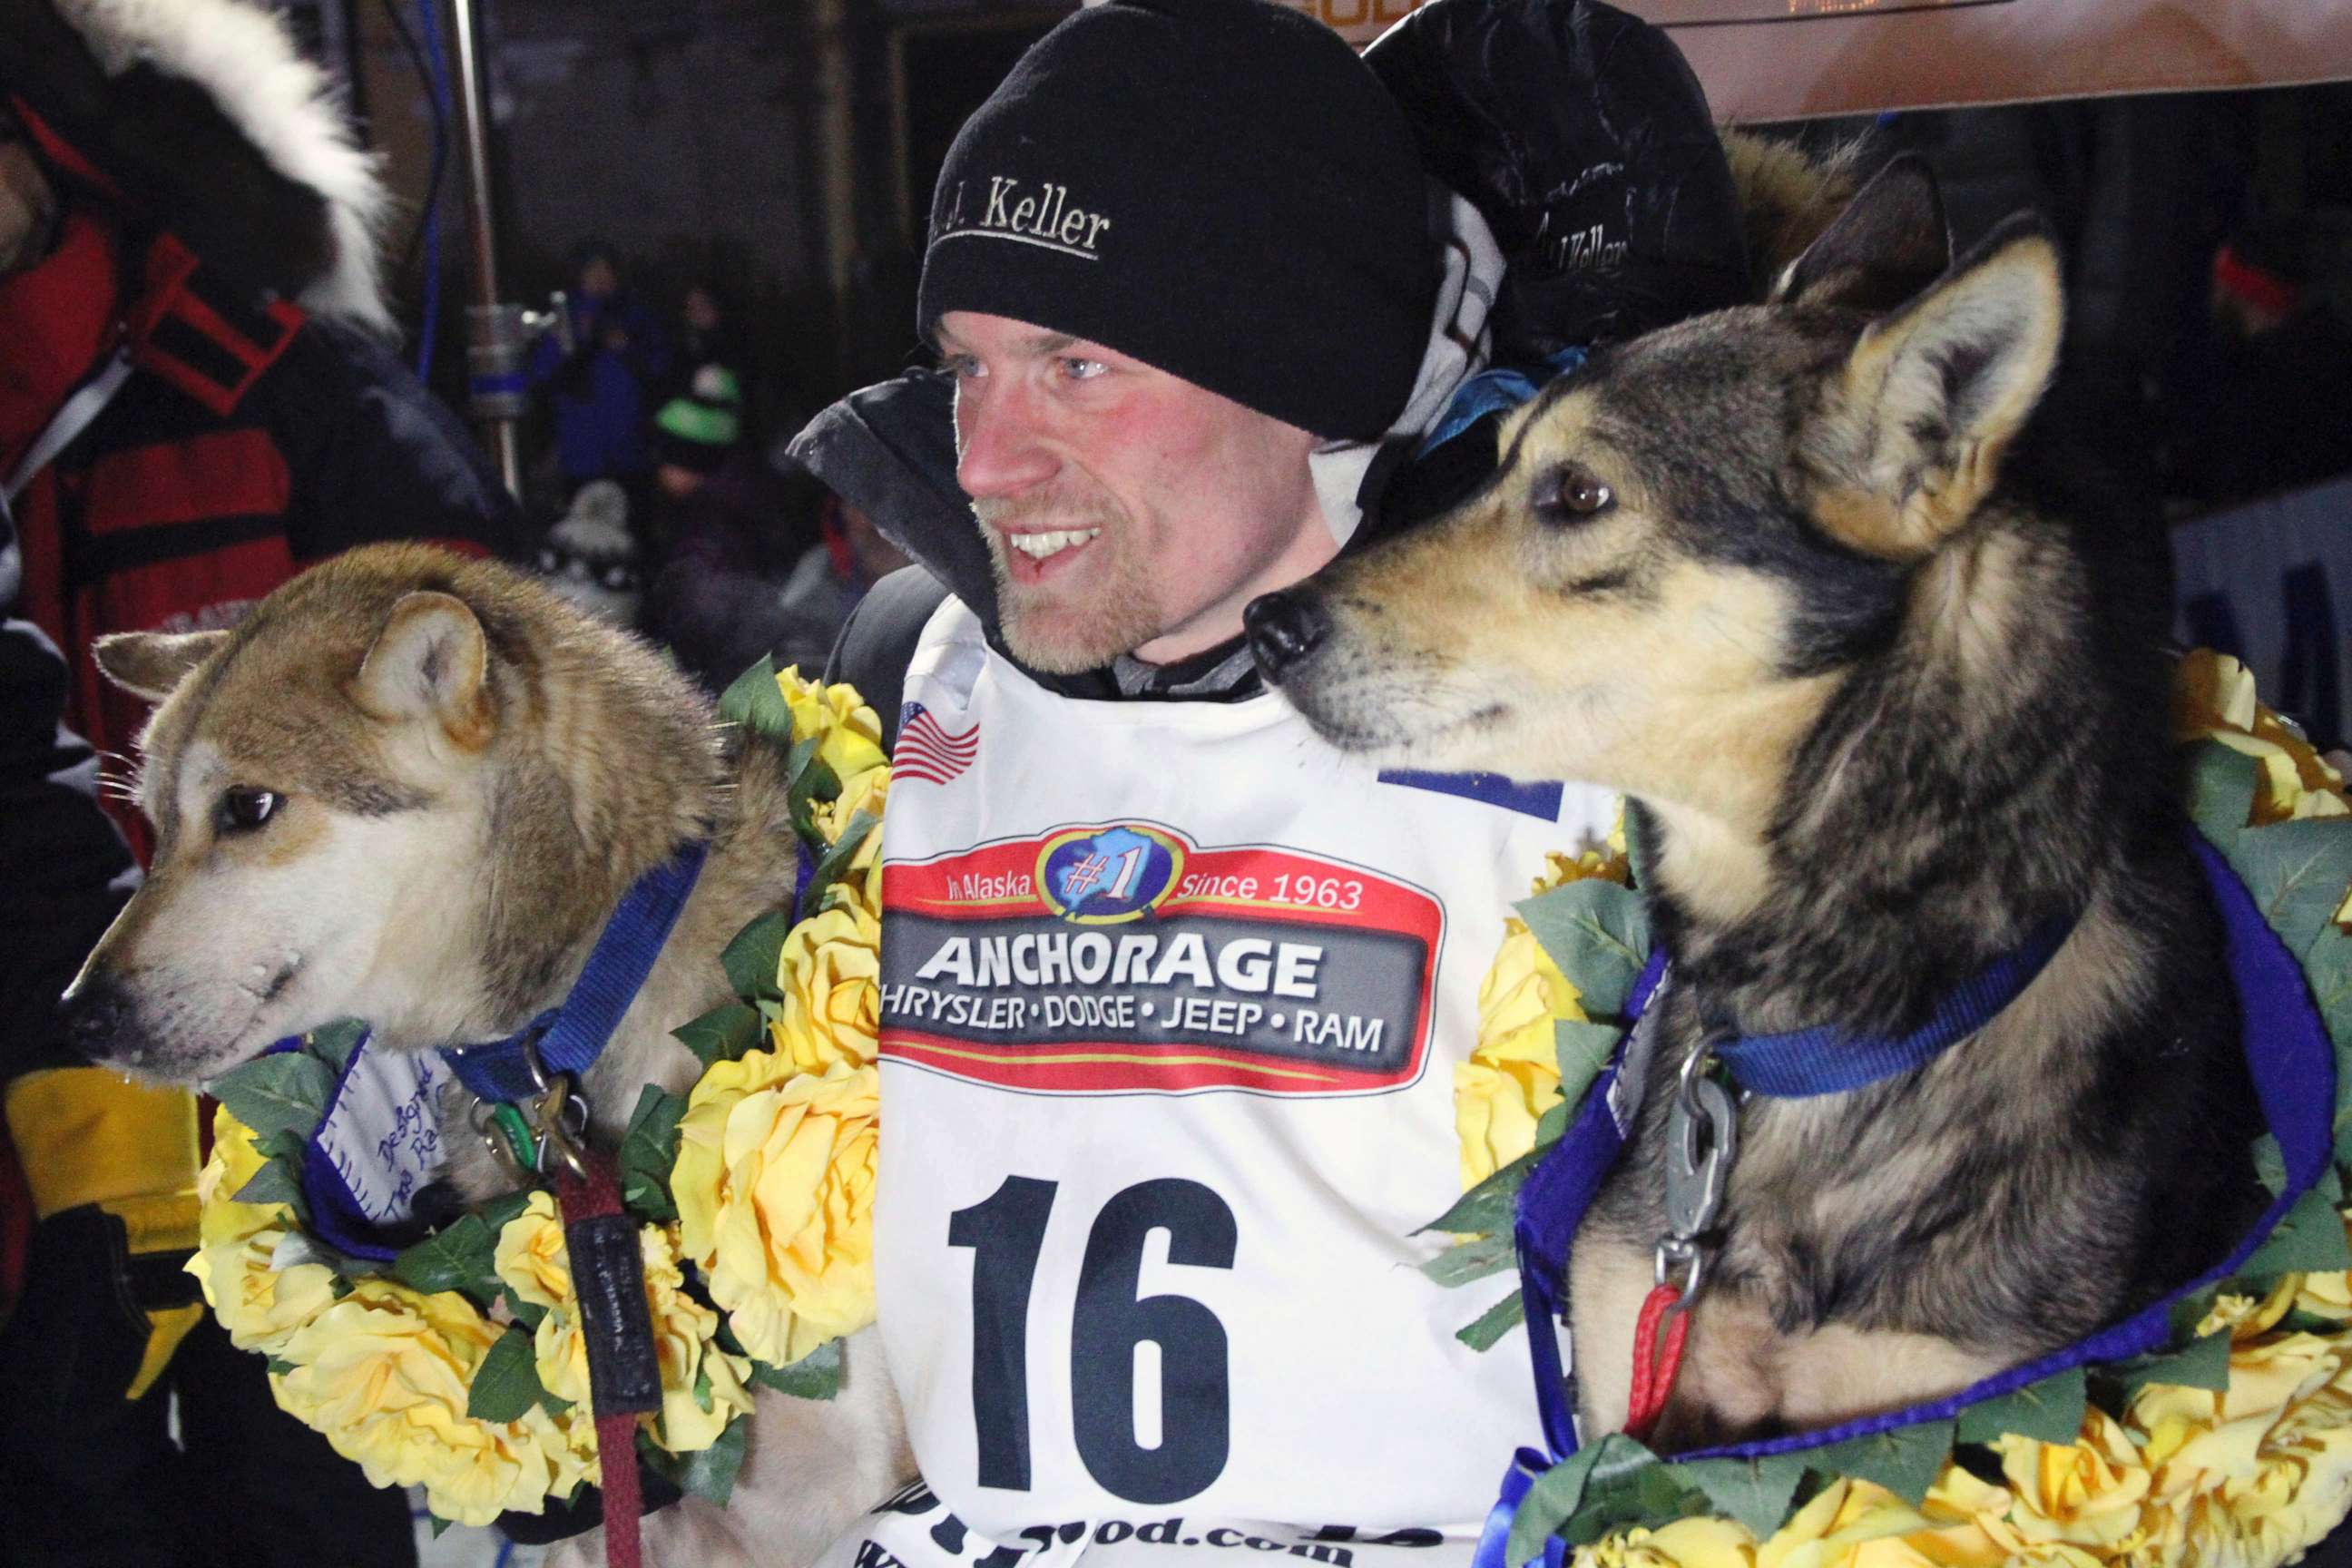 PHOTO: Dallas Seavey poses with his lead dogs Reef, left, and Tide after finishing the Iditarod Trail Sled Dog Race in Nome, Alaska in this March 15, 2016 file photo.